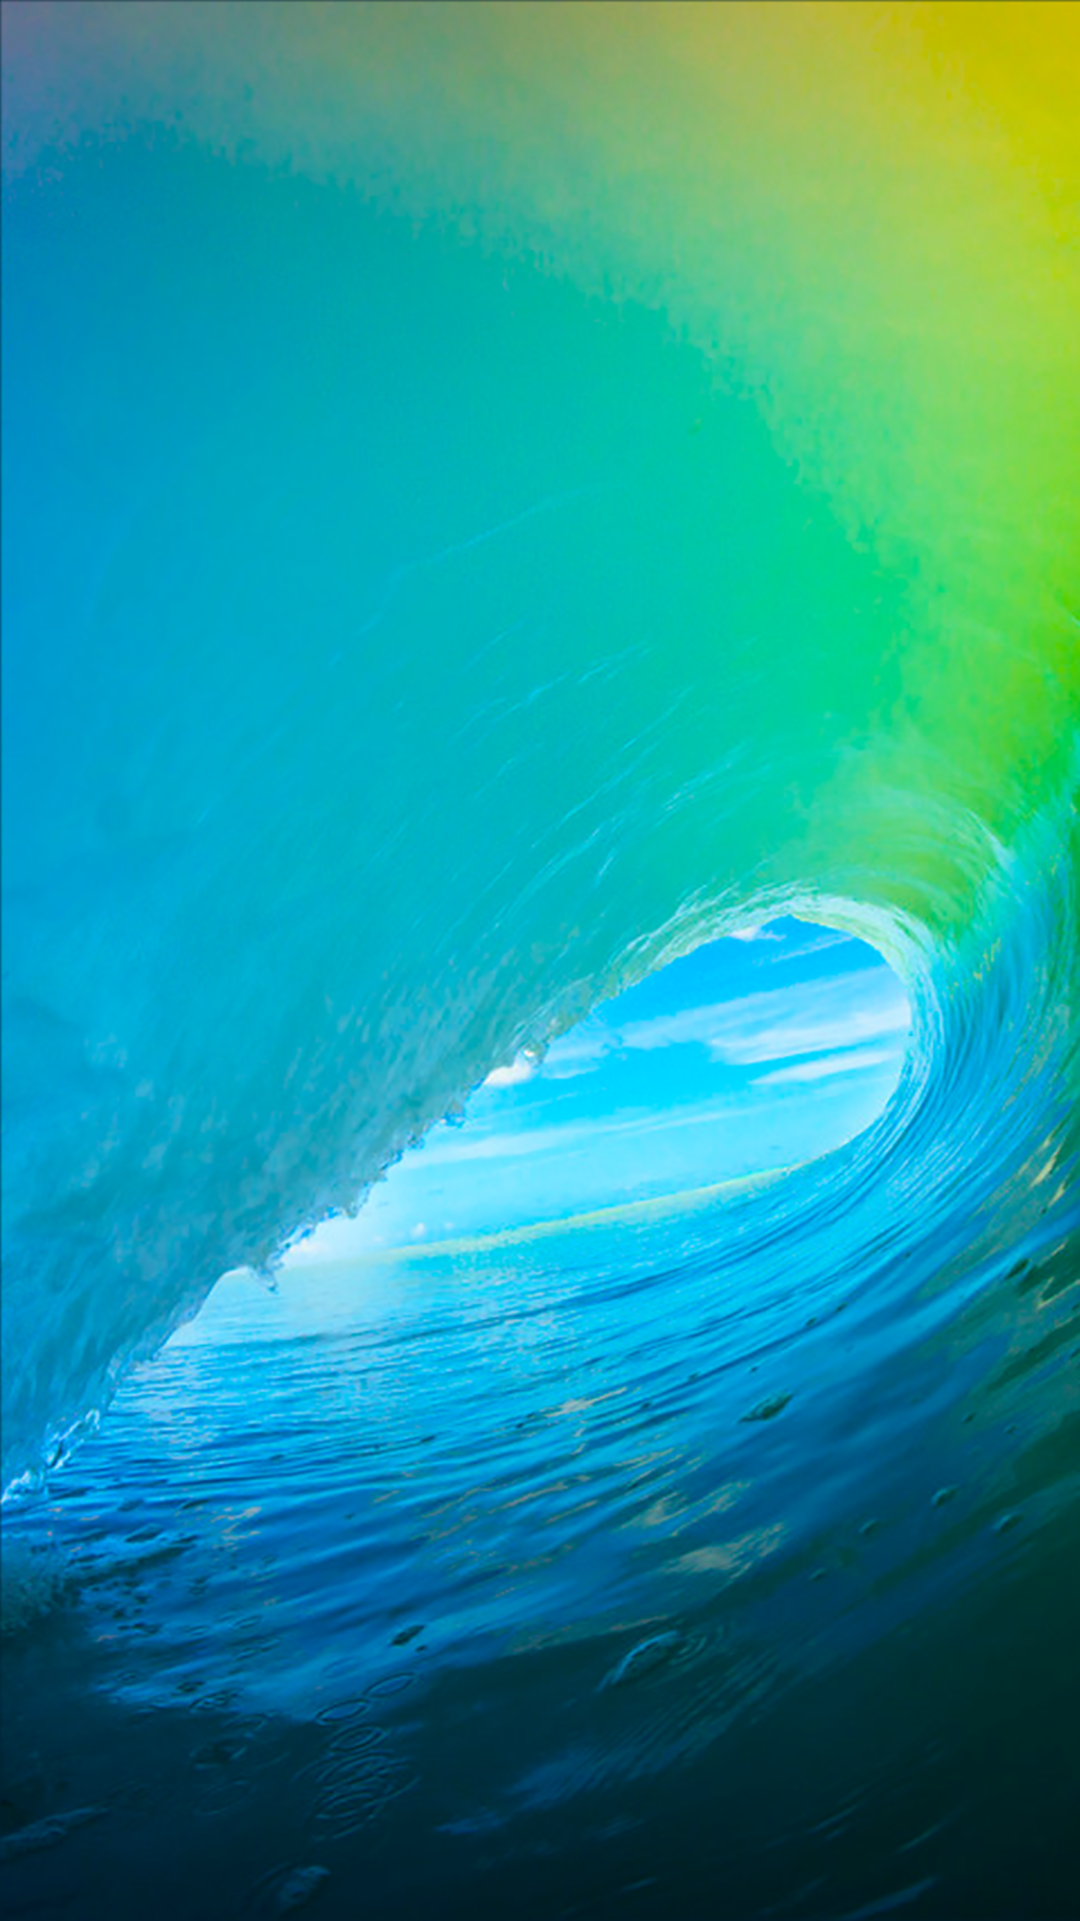 Here are all of iOS 9's colorful new wallpapers for your iPhone - 9to5Mac